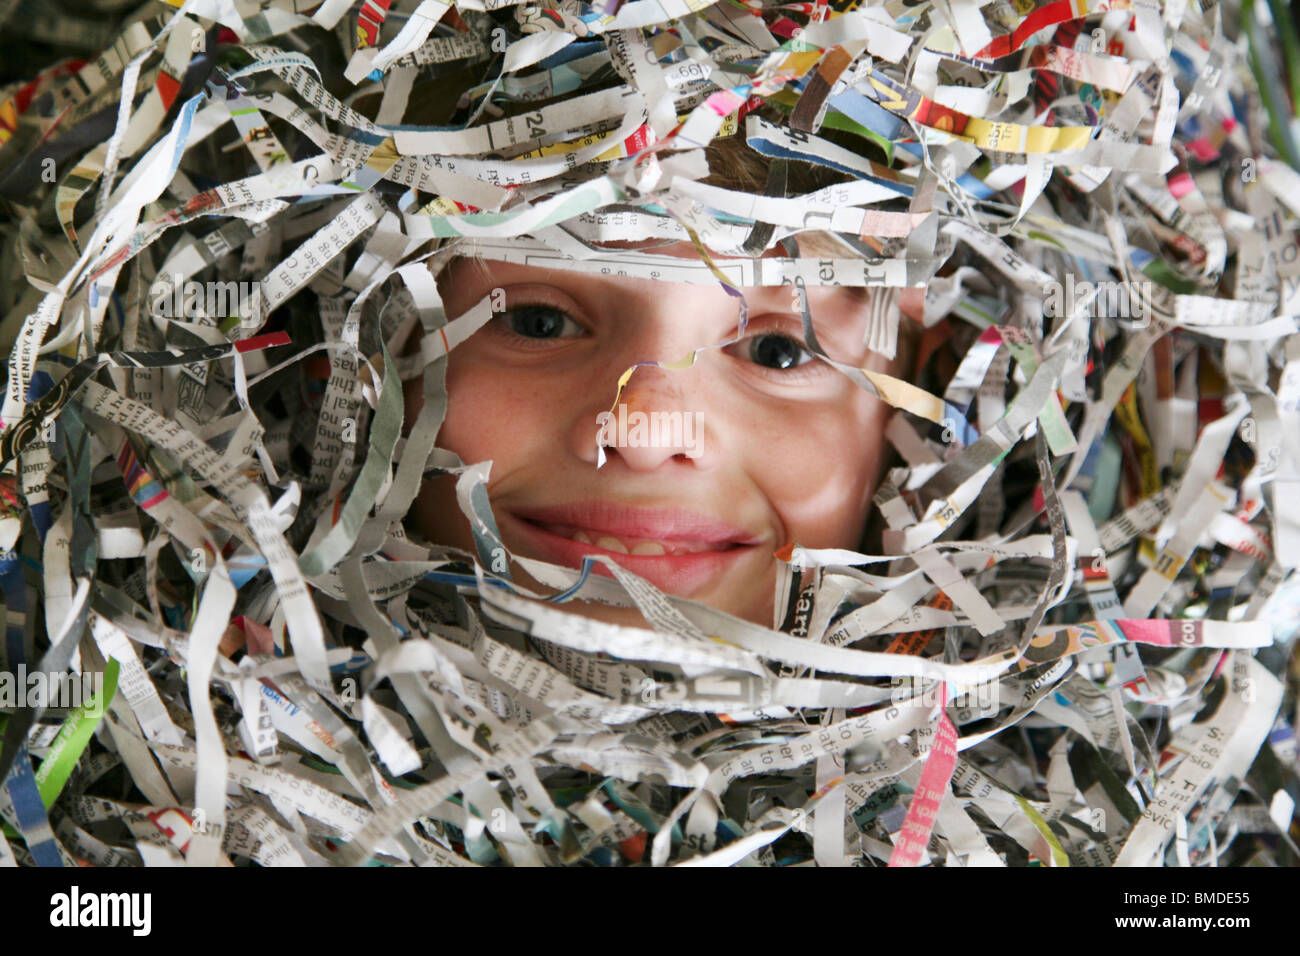 Girl looking through shredded newspapers Stock Photo